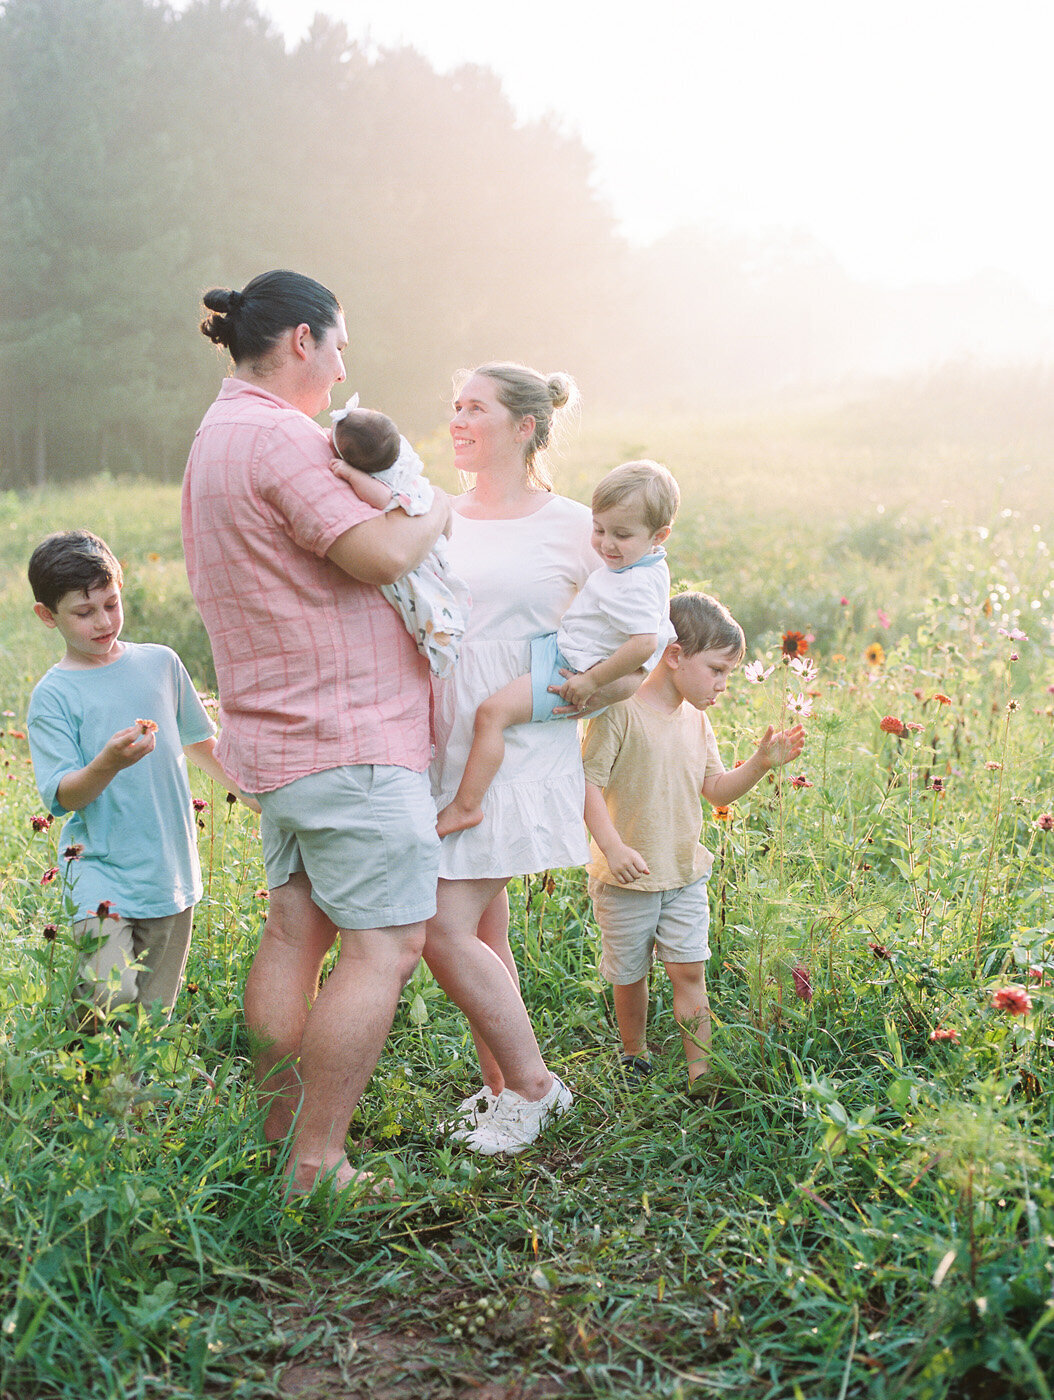 Raleigh Family Photographer | Jessica Agee Photography - 009